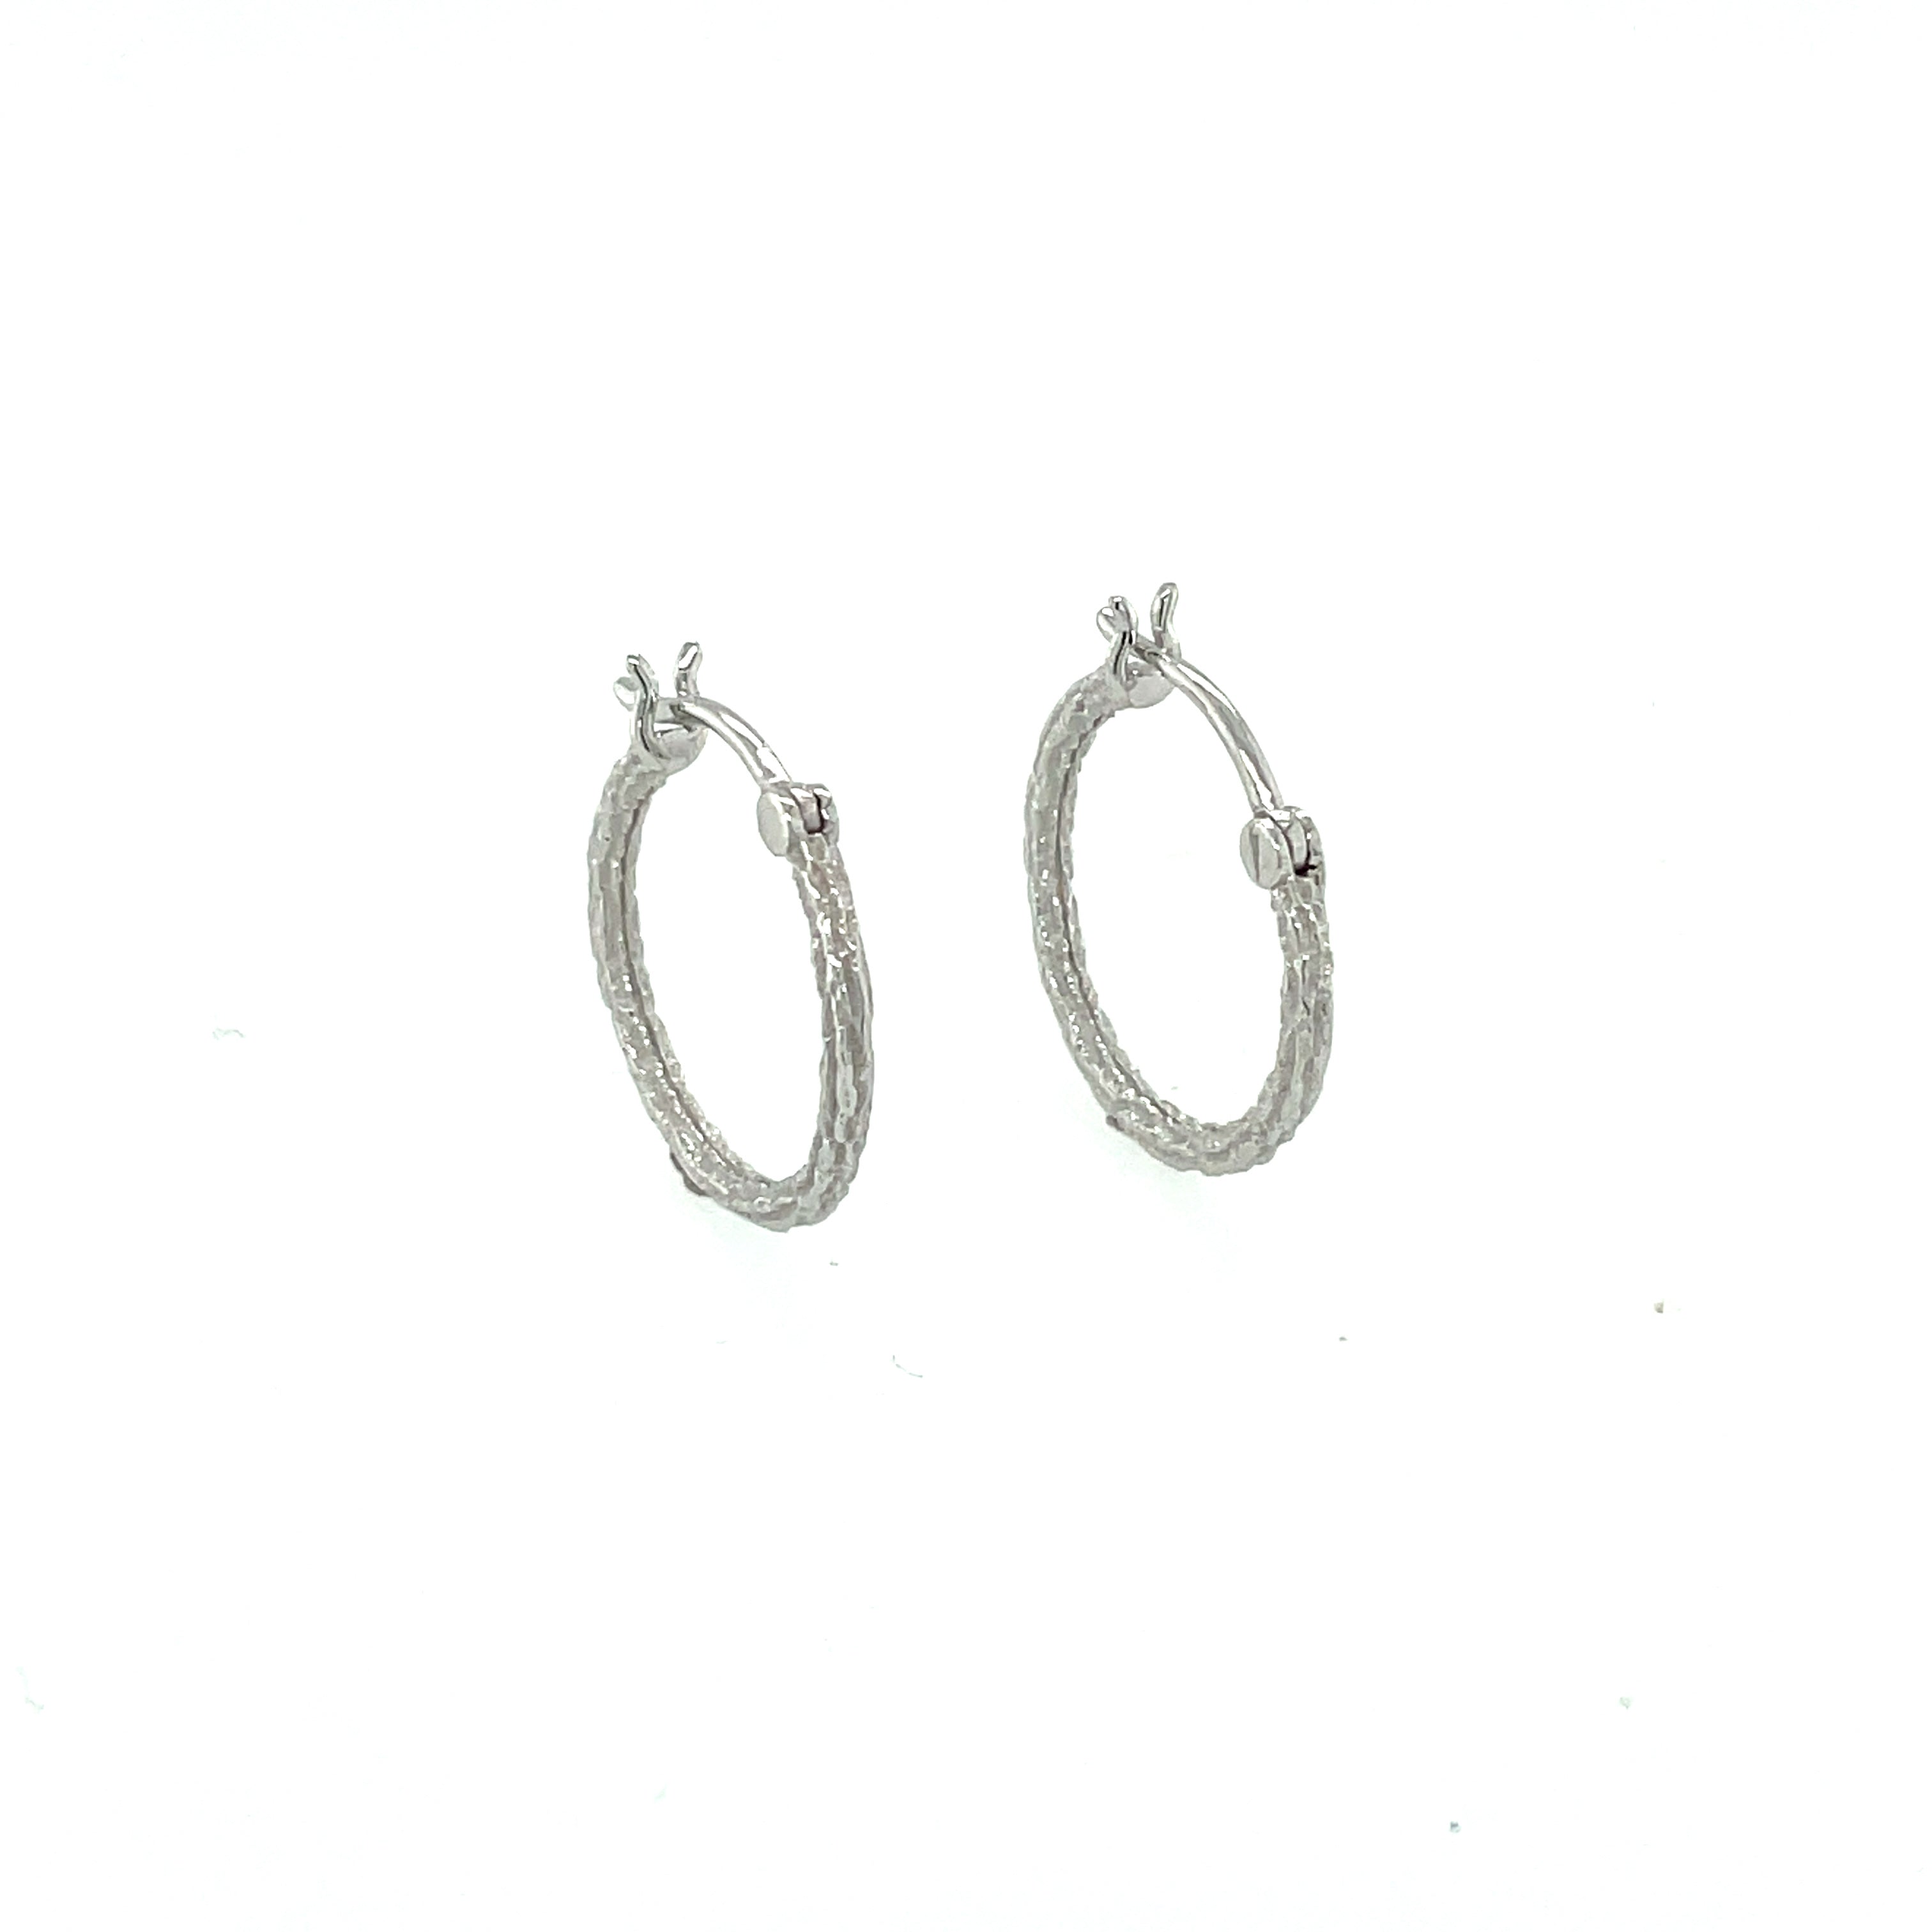 Silver Hoop Earrings - MJ023 - Hallmark Jewellers Formby & The Jewellers Bench Widnes